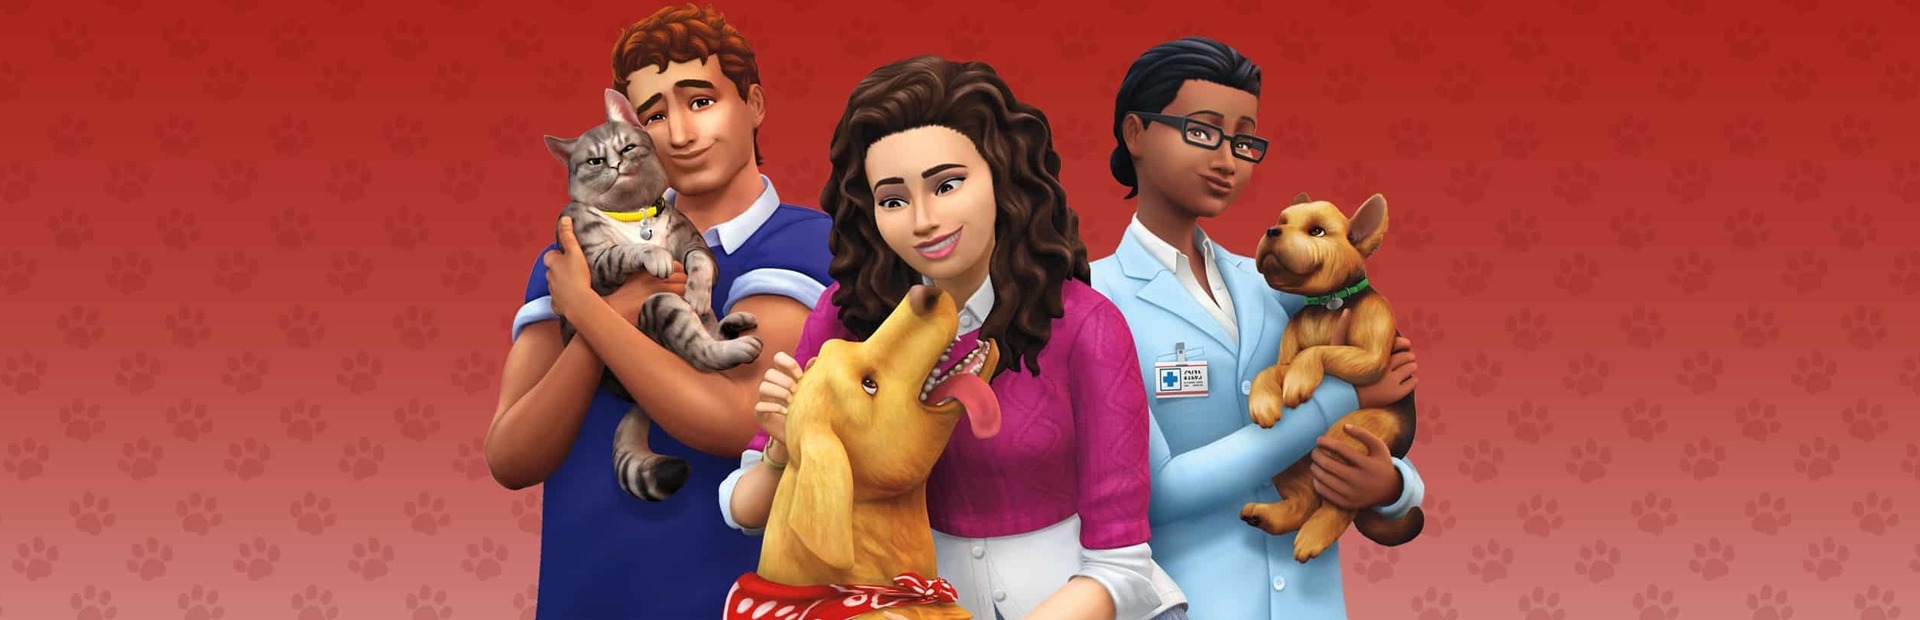 The Sims 4 Cats & Dogs PS4